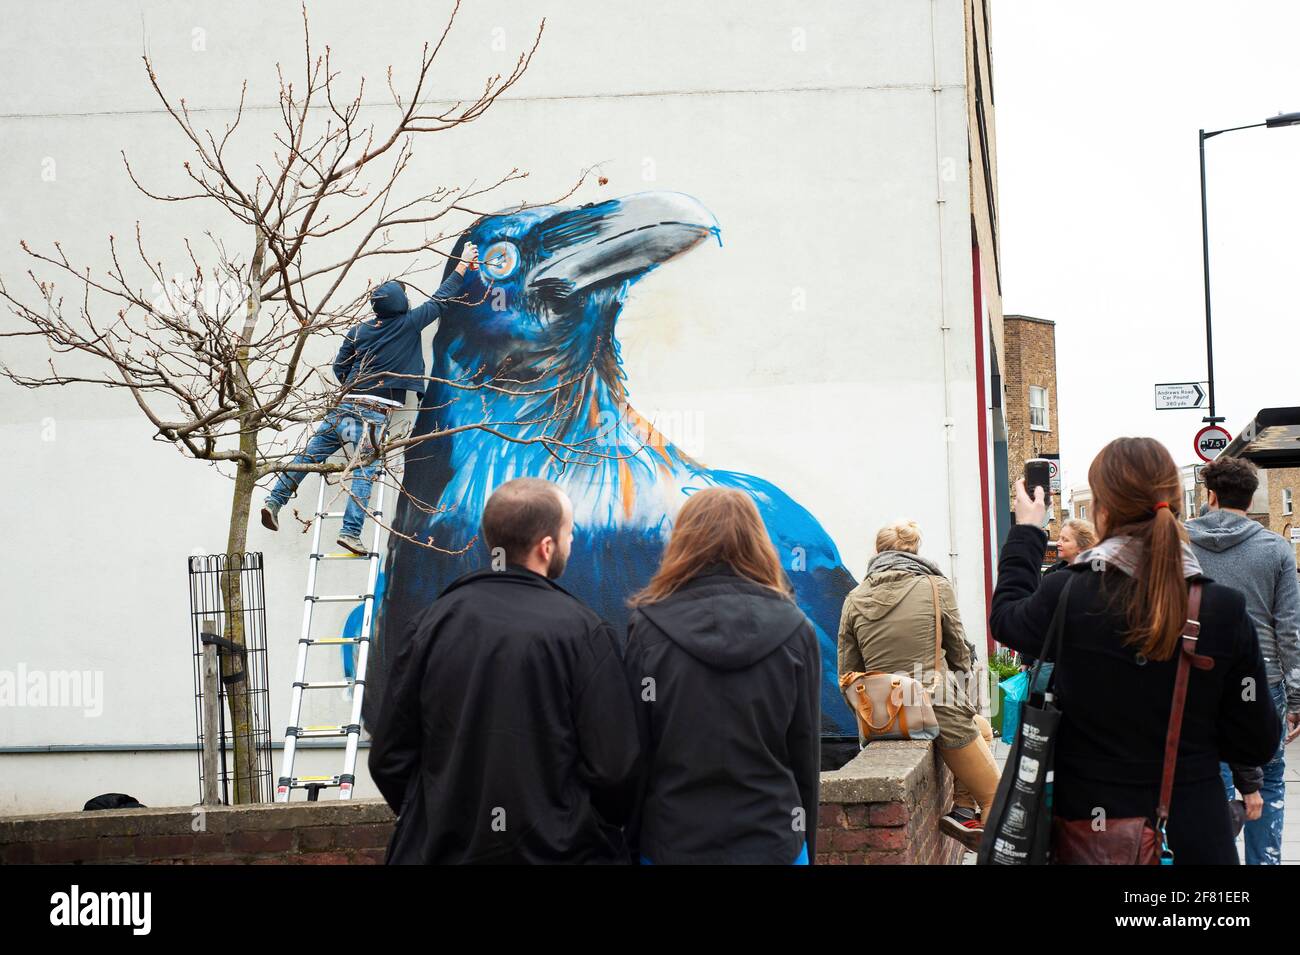 Graffiti artist Boe + Irony in action. Crow mural in the making with people watching on Whiston Road, East London, UK. Apr 2013 Stock Photo